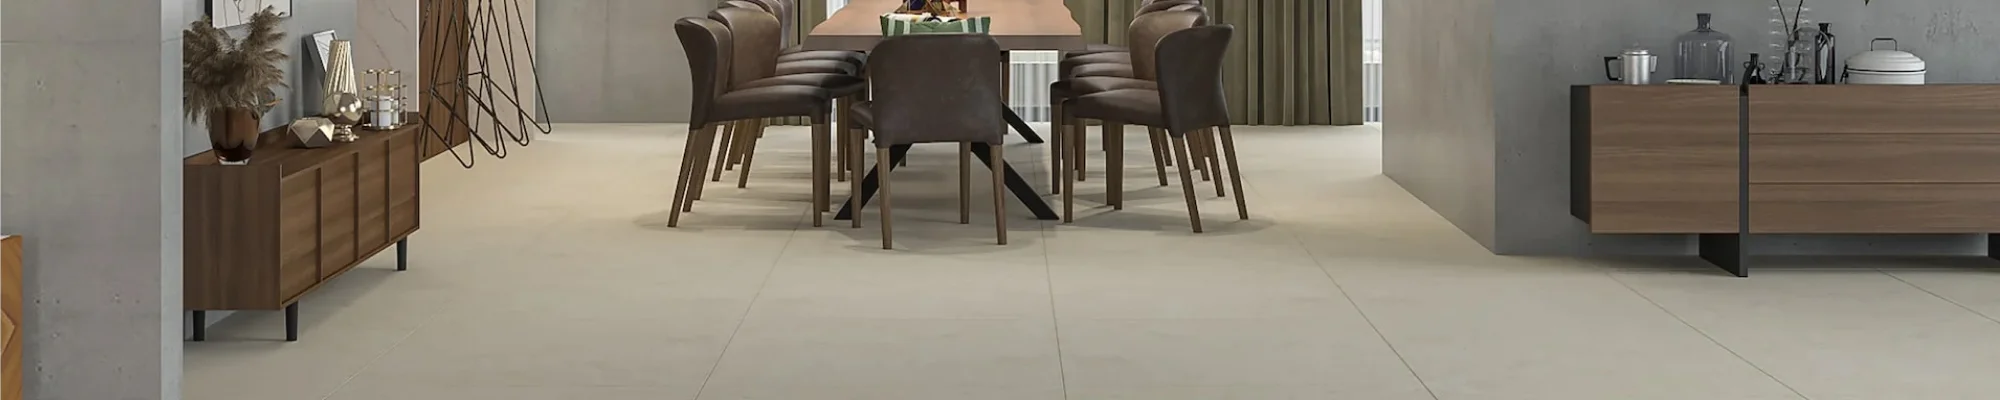 Learn more about waterproof flooring - a practical and long-lasting flooring option